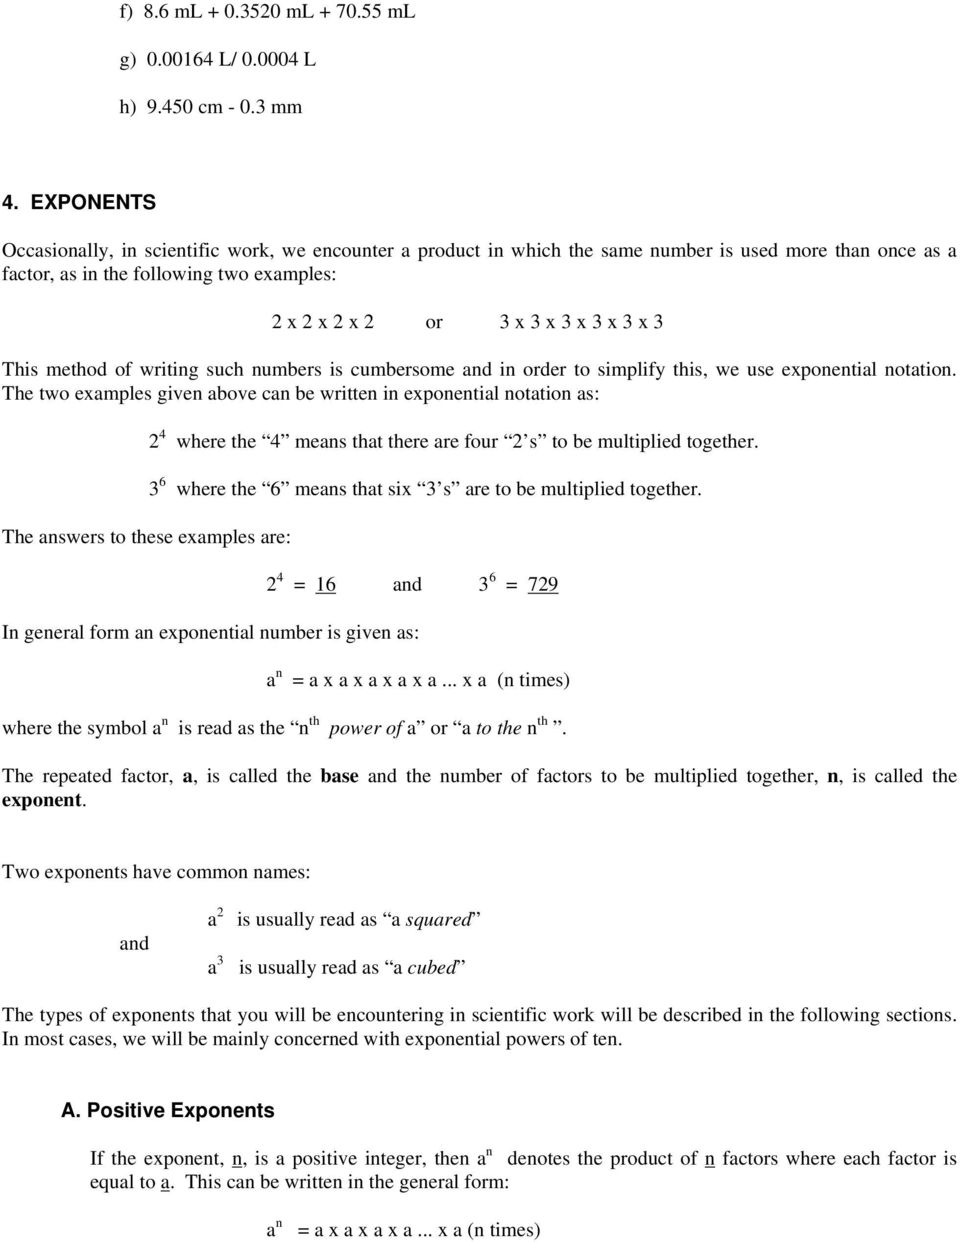 3 This method of writing such numbers is cumbersome and in order to simplify this, we use exponential notation.